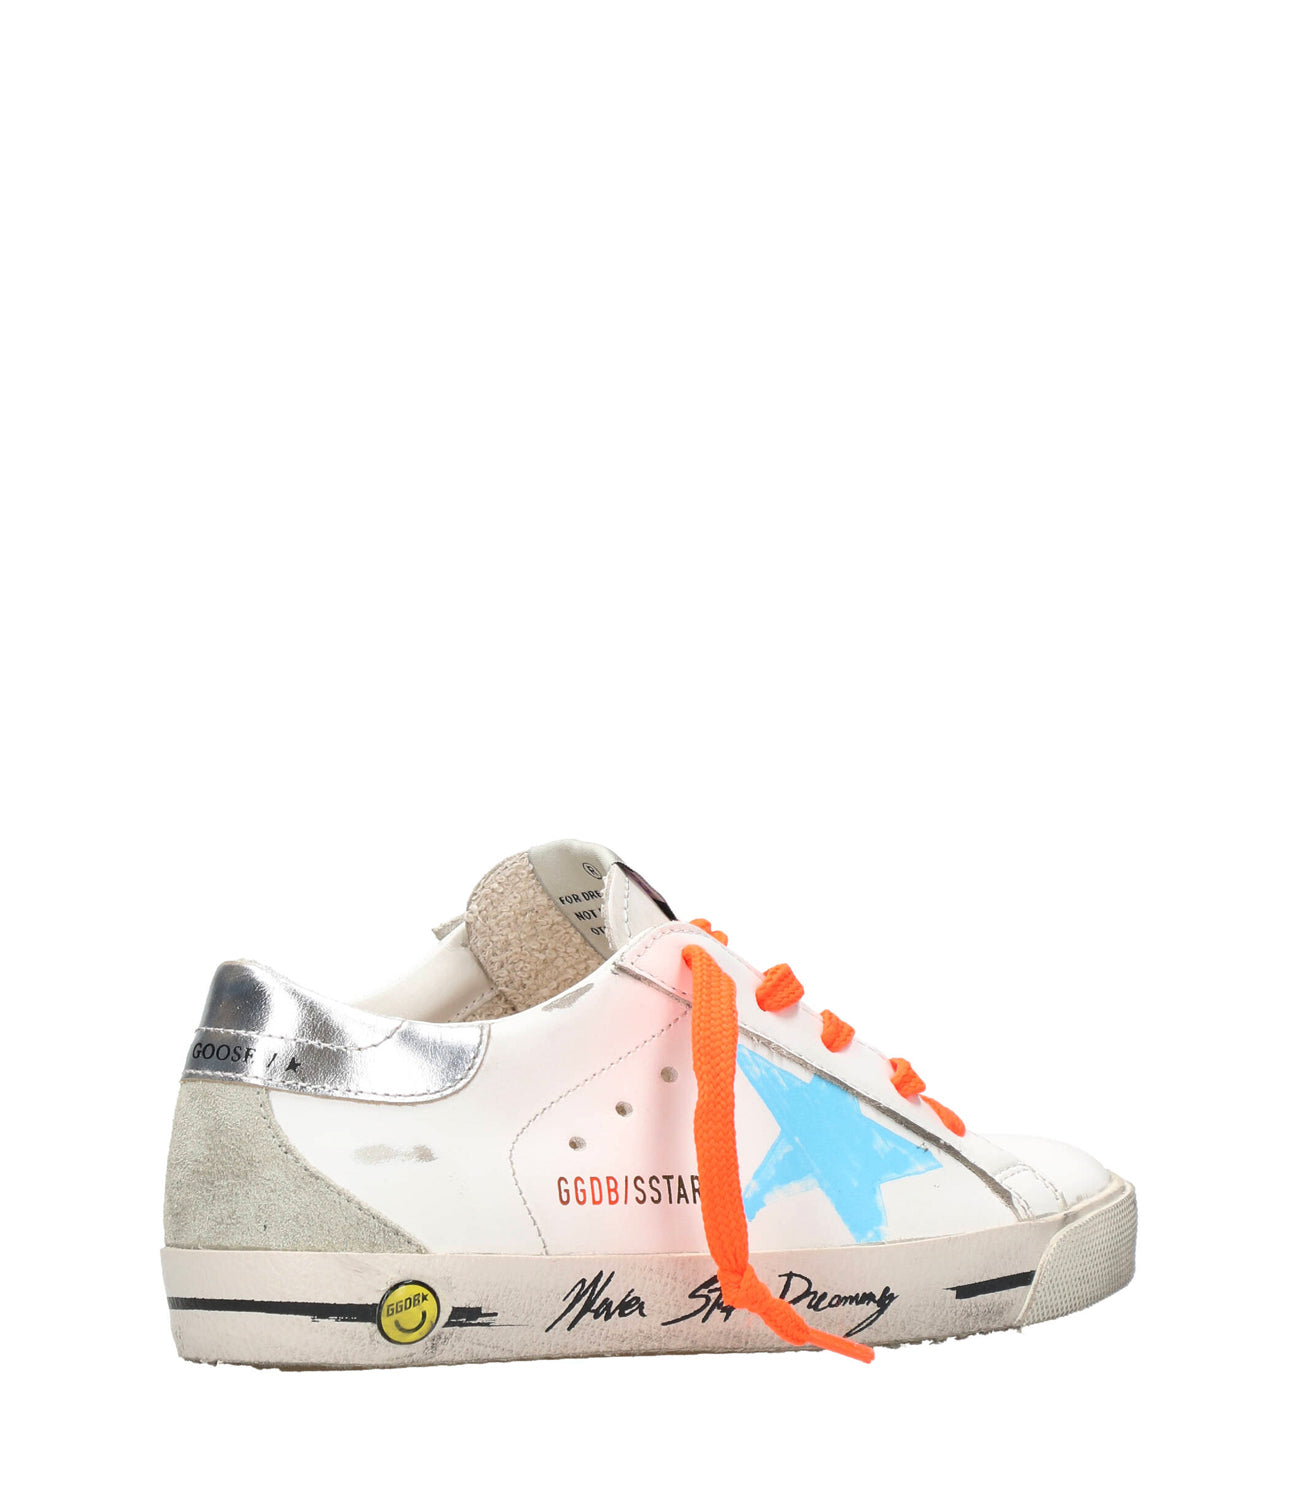 Golden Goose Deluxe Brand | Sneakers White, Turquoise and Silver